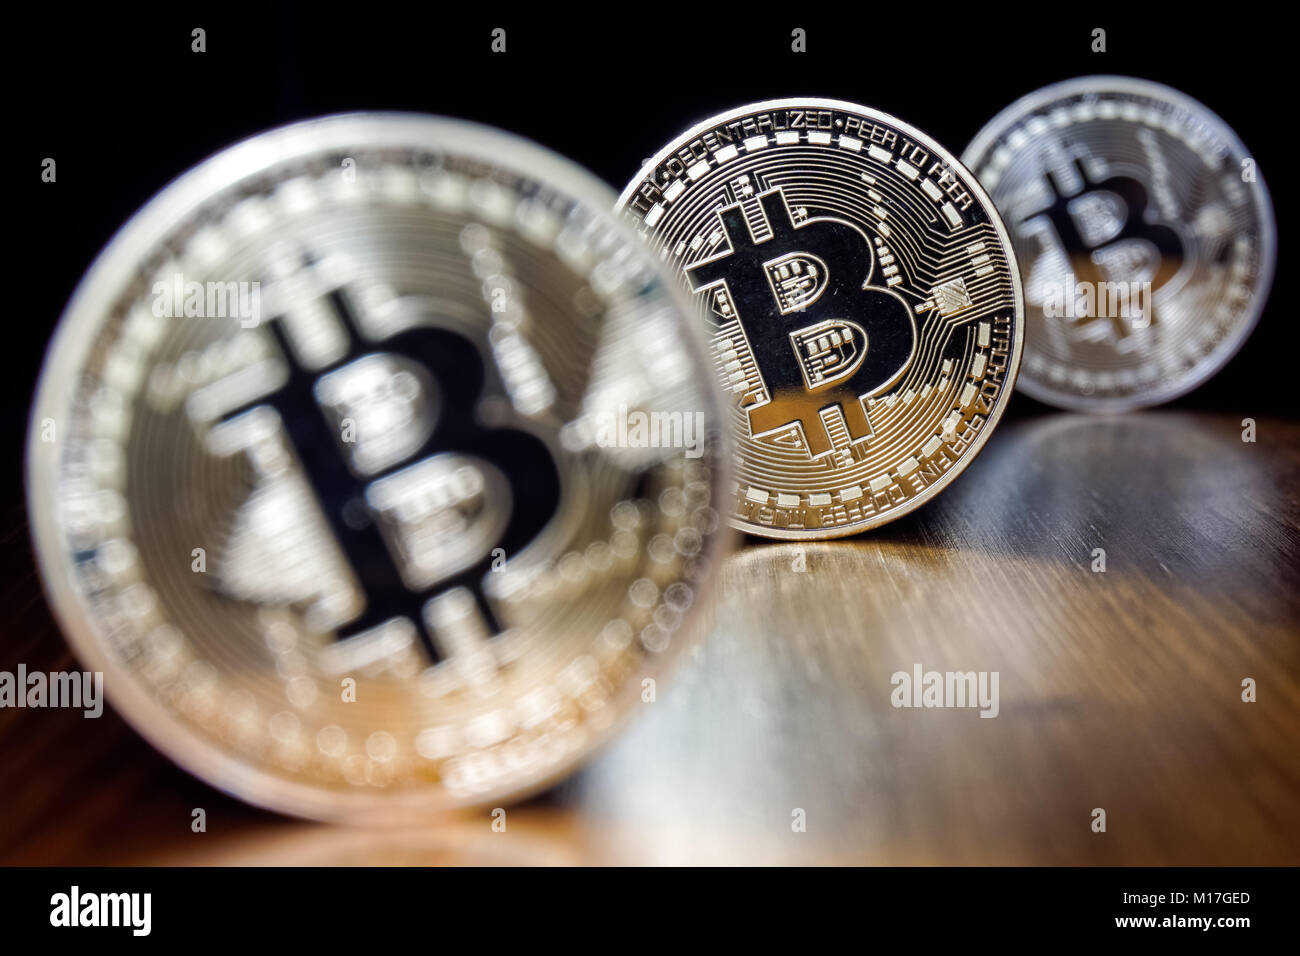 Cryptocurrency High Resolution Stock Photography and Images - Alamy